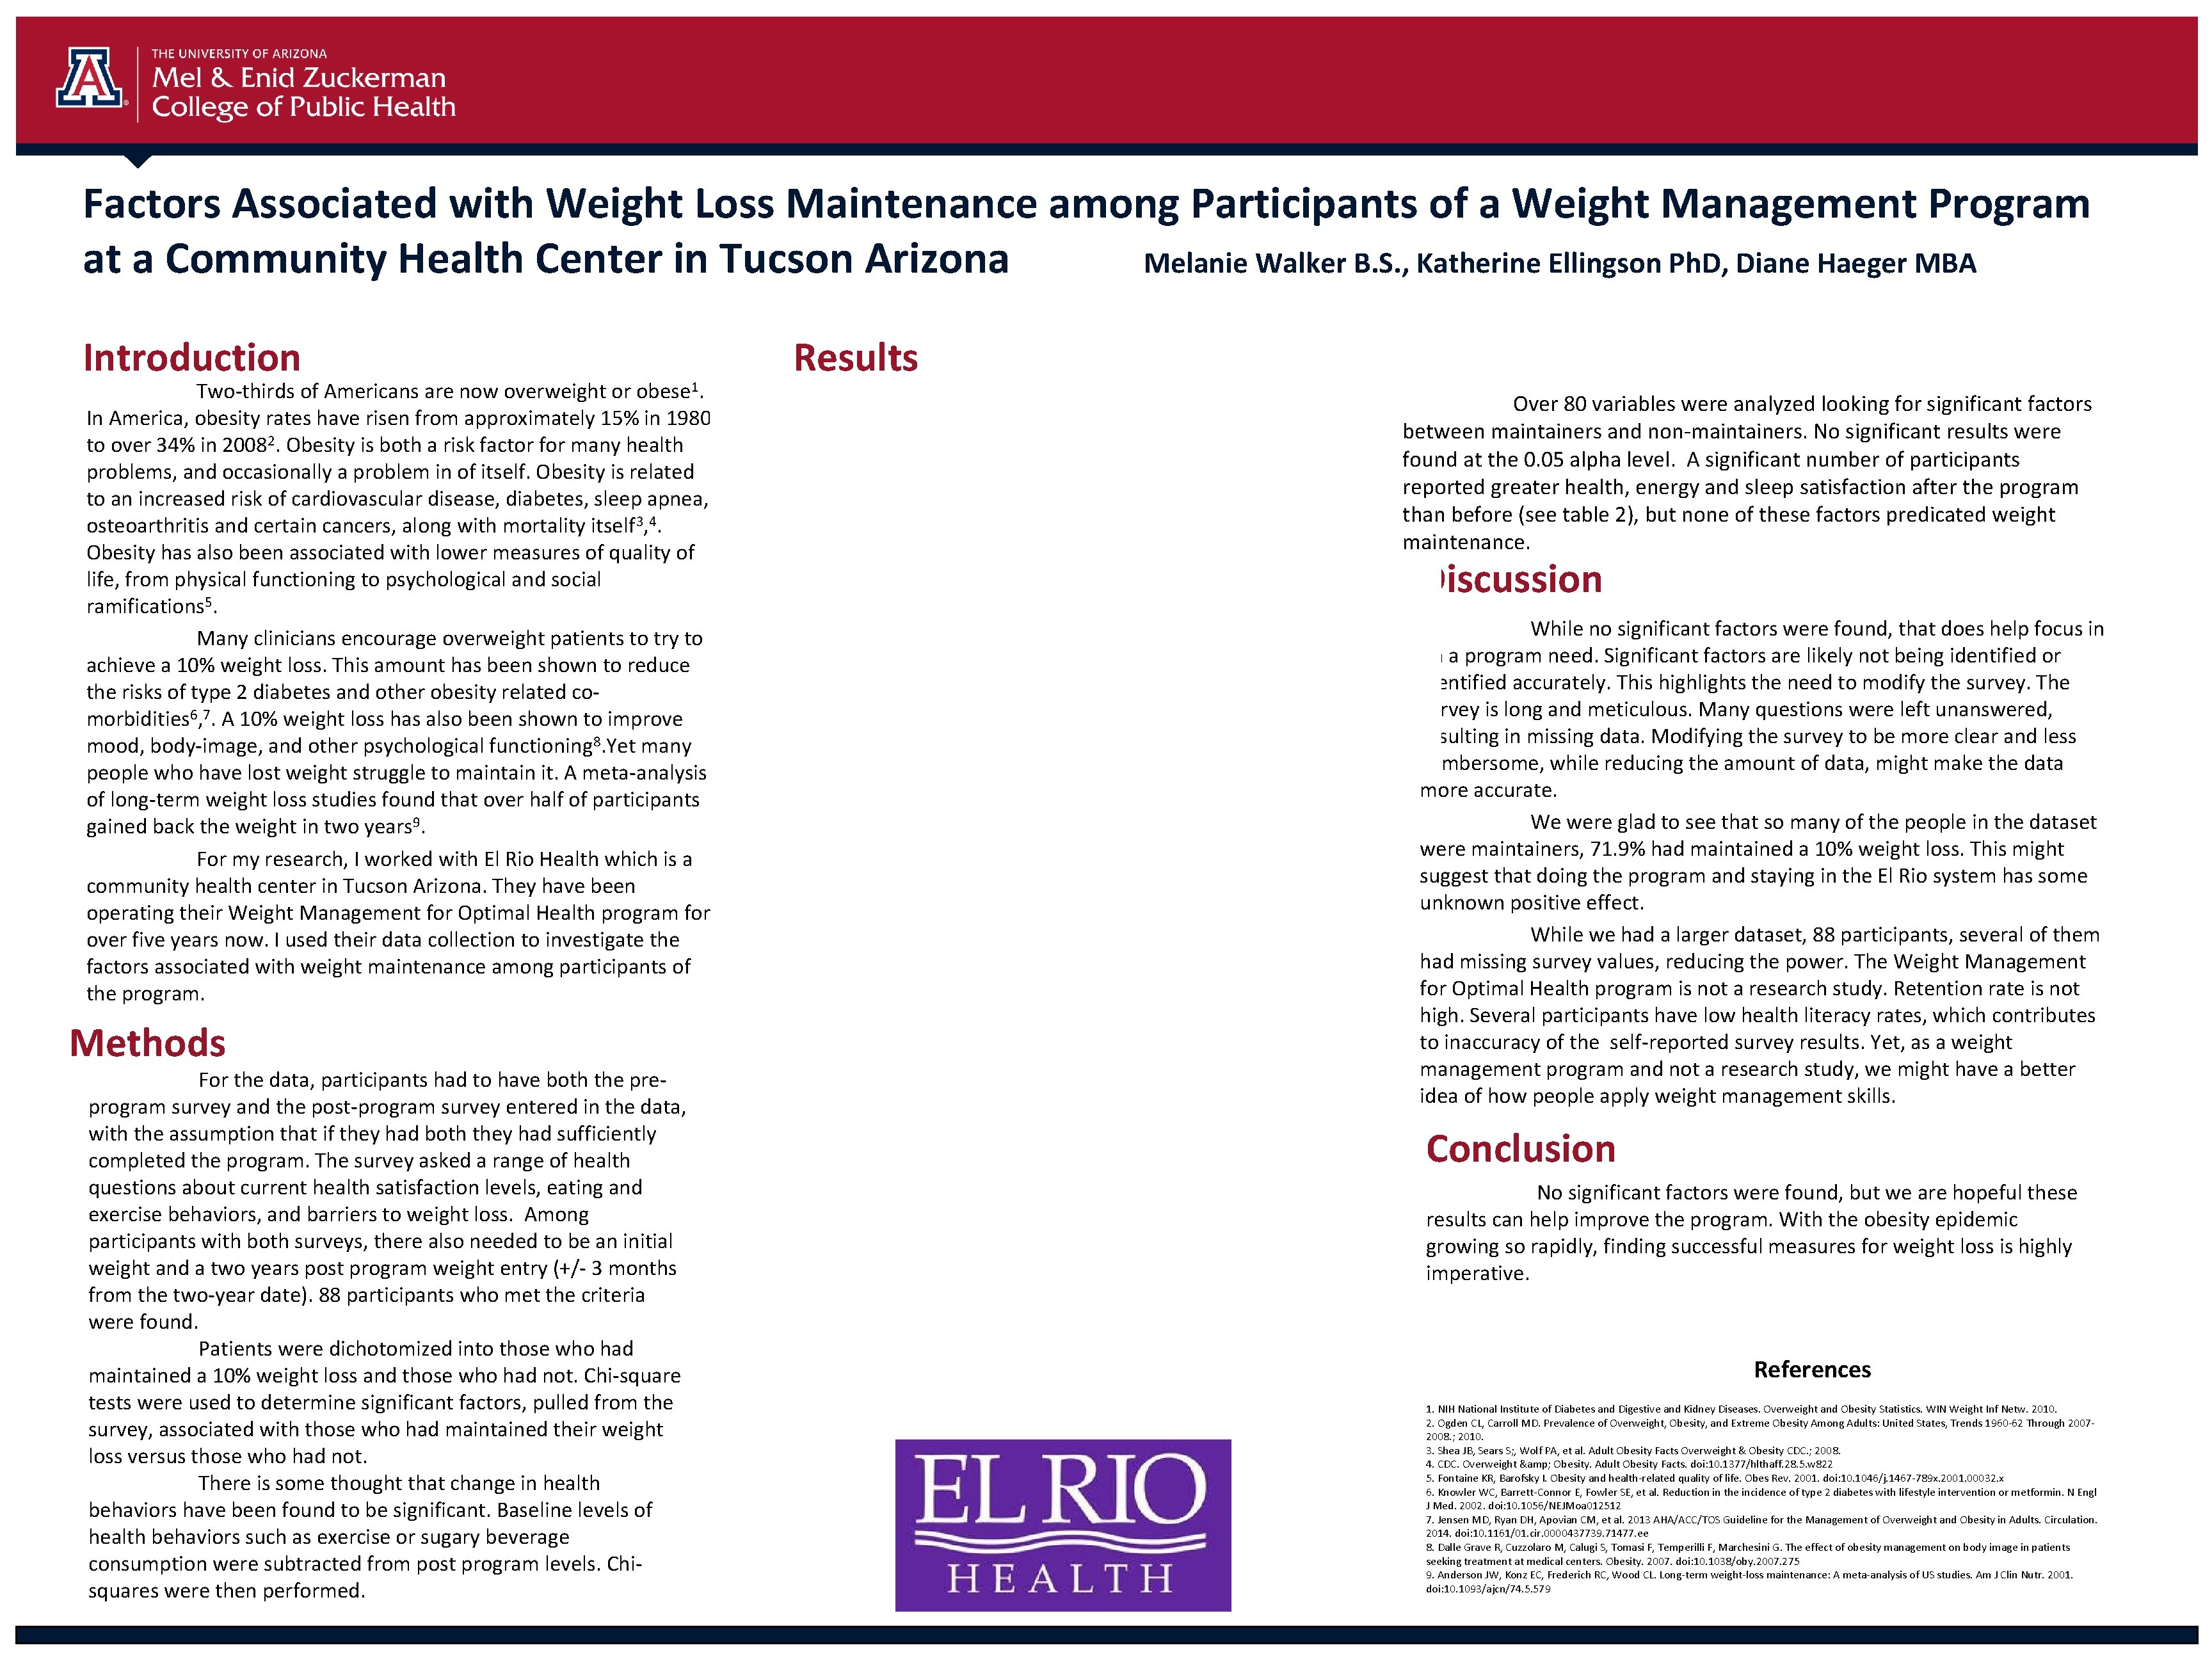 Factors Associated with Weight Loss Maintenance among Participants of a Weight Management Program at